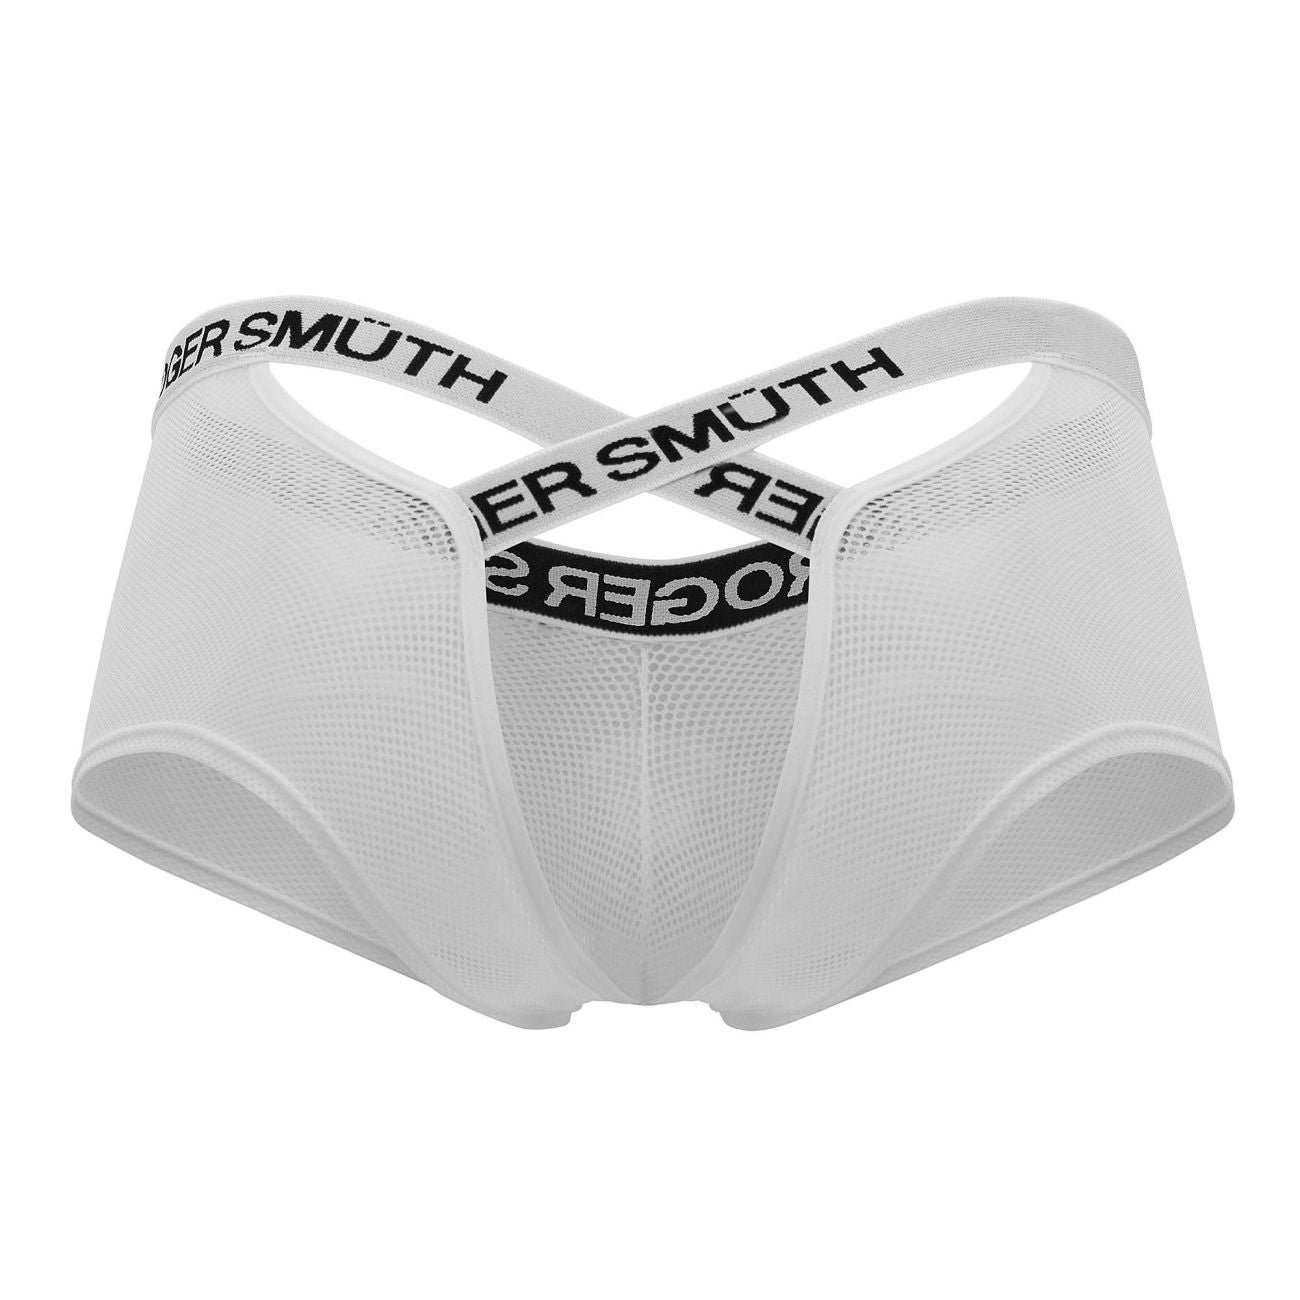 Roger Smuth RS062 Trunks White